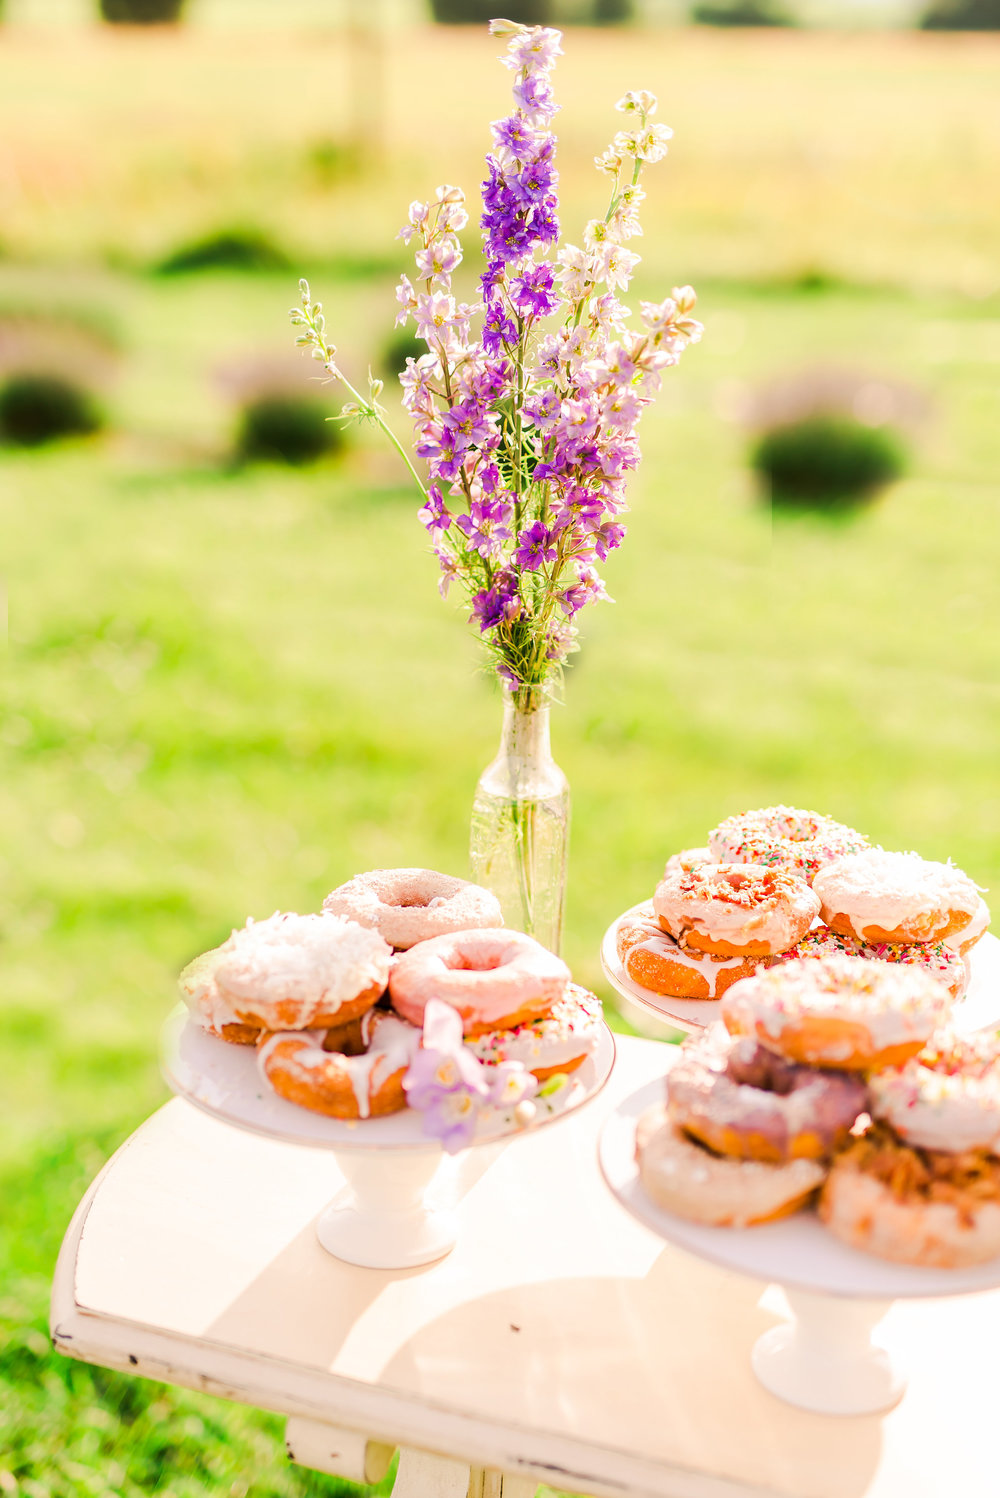 Dessert Table with donuts